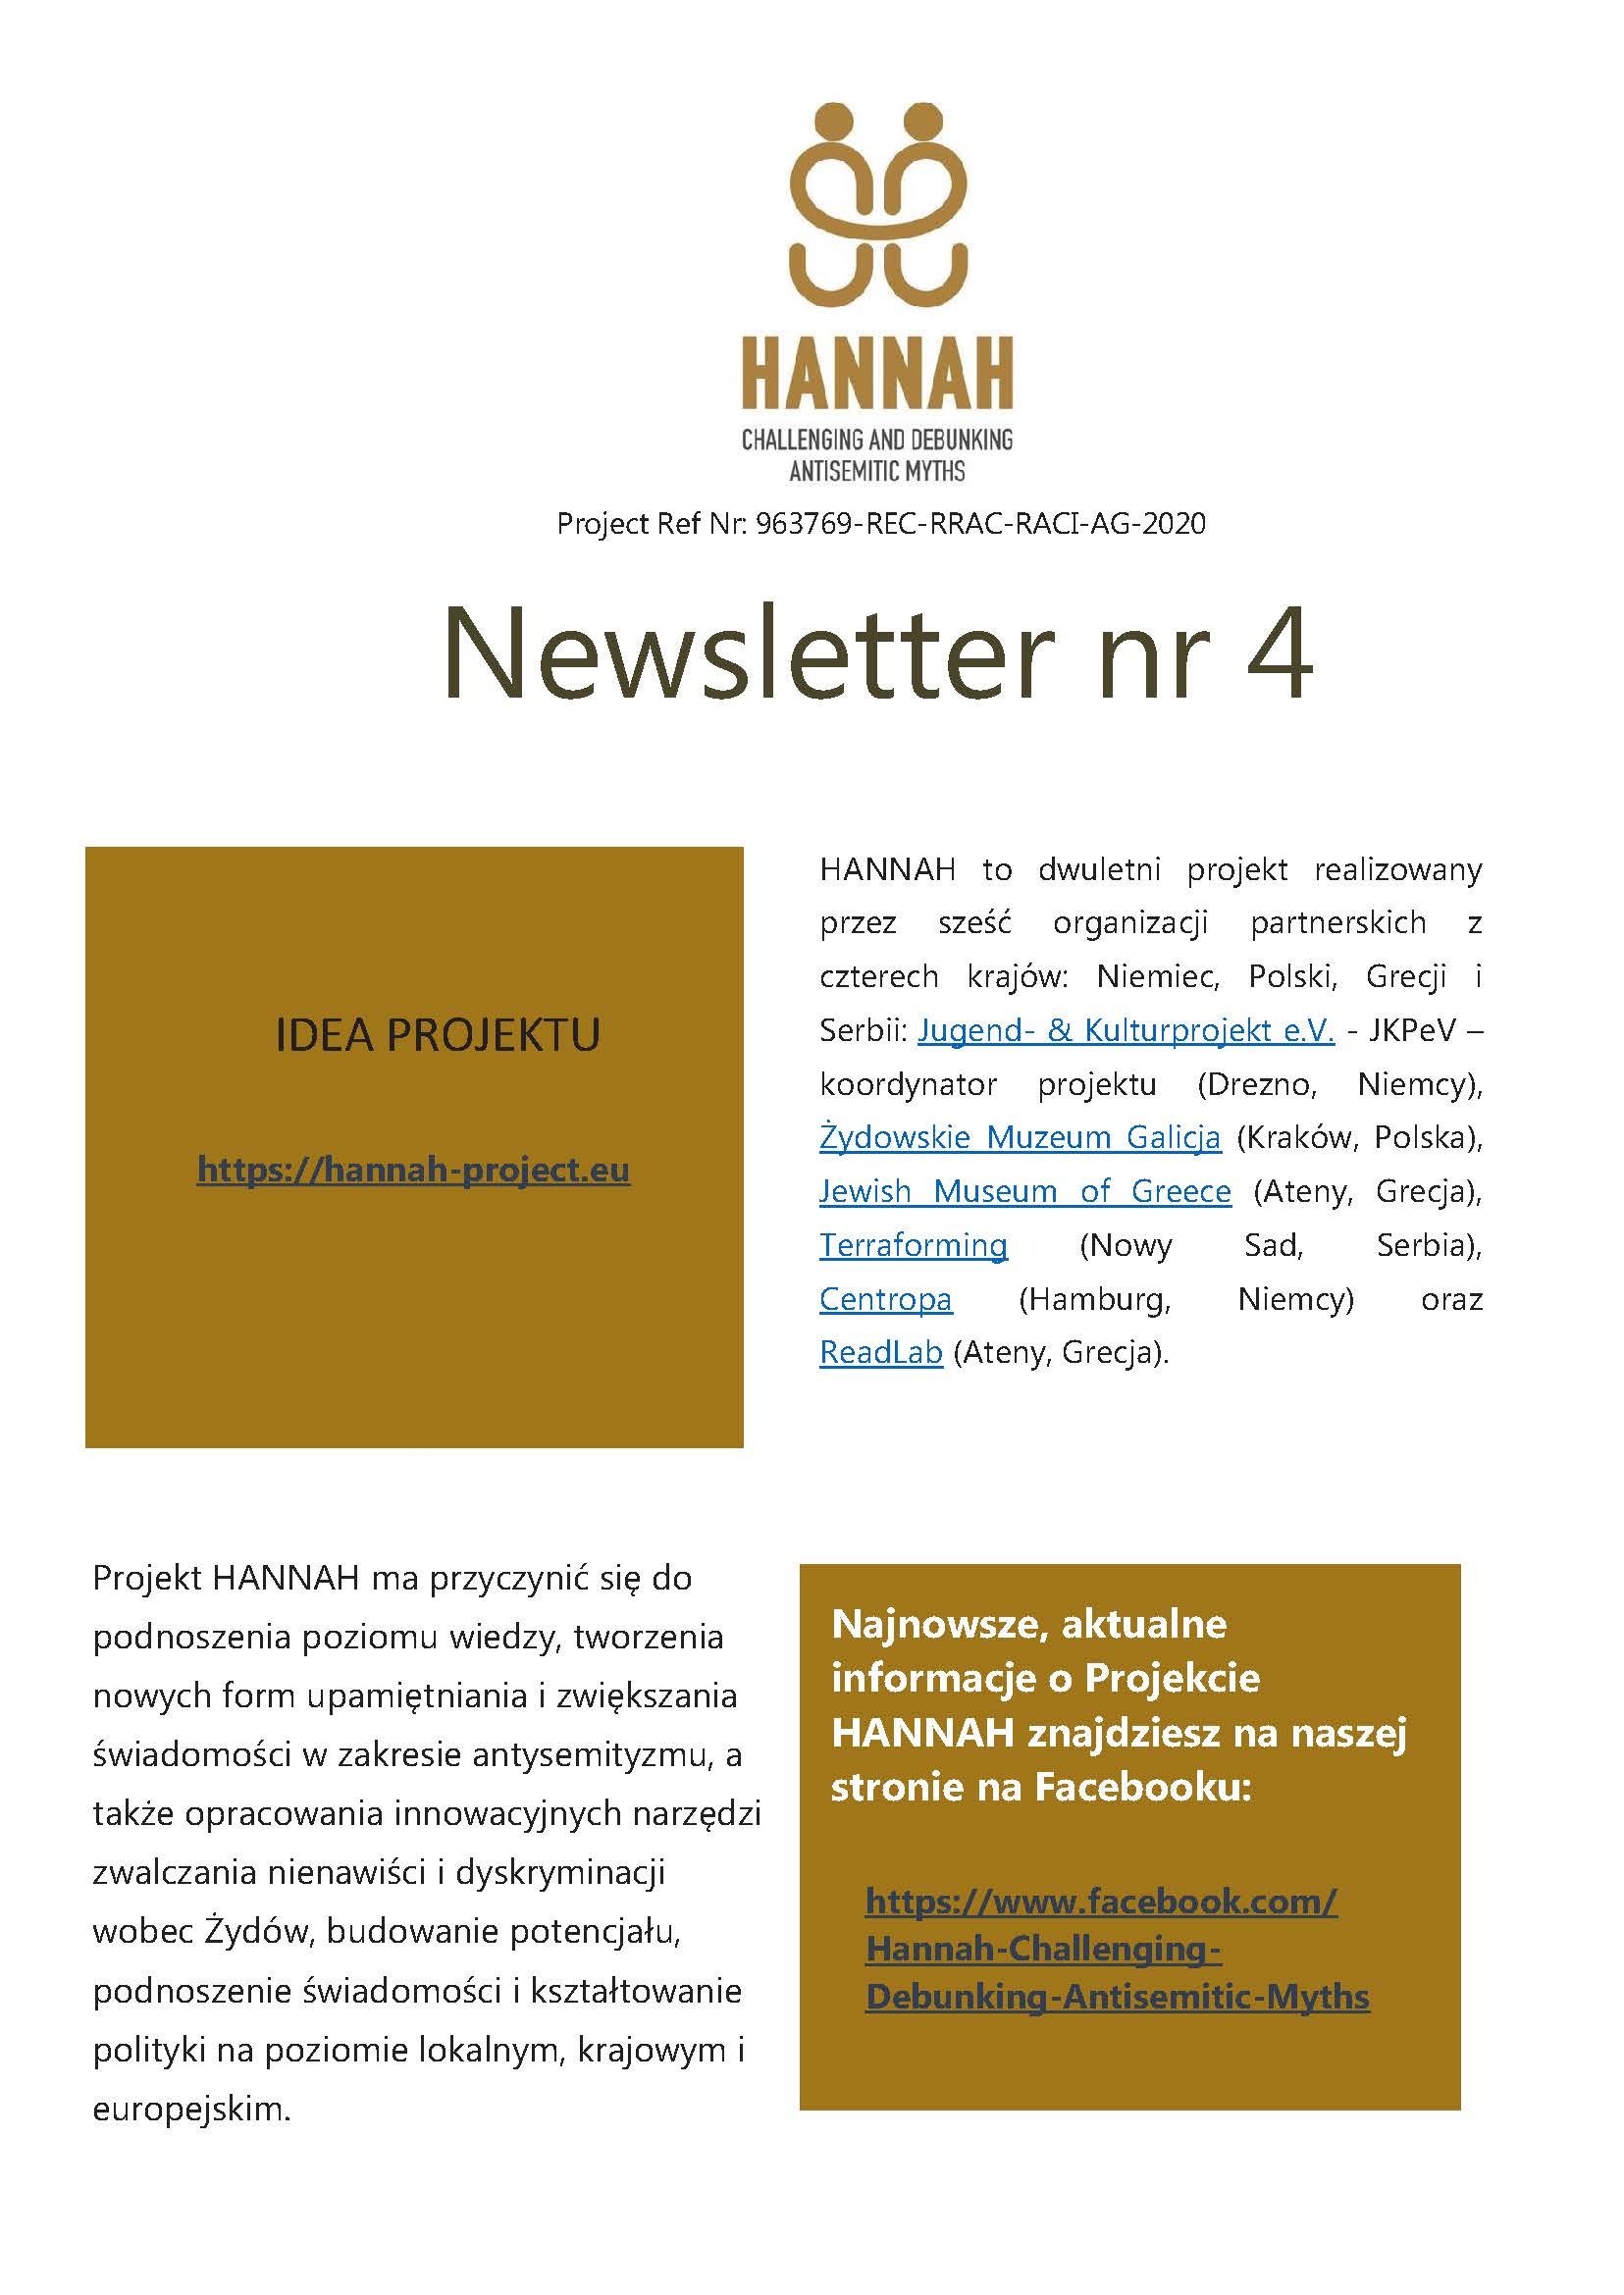 HANNAH 4th newsletter_English_Page_1